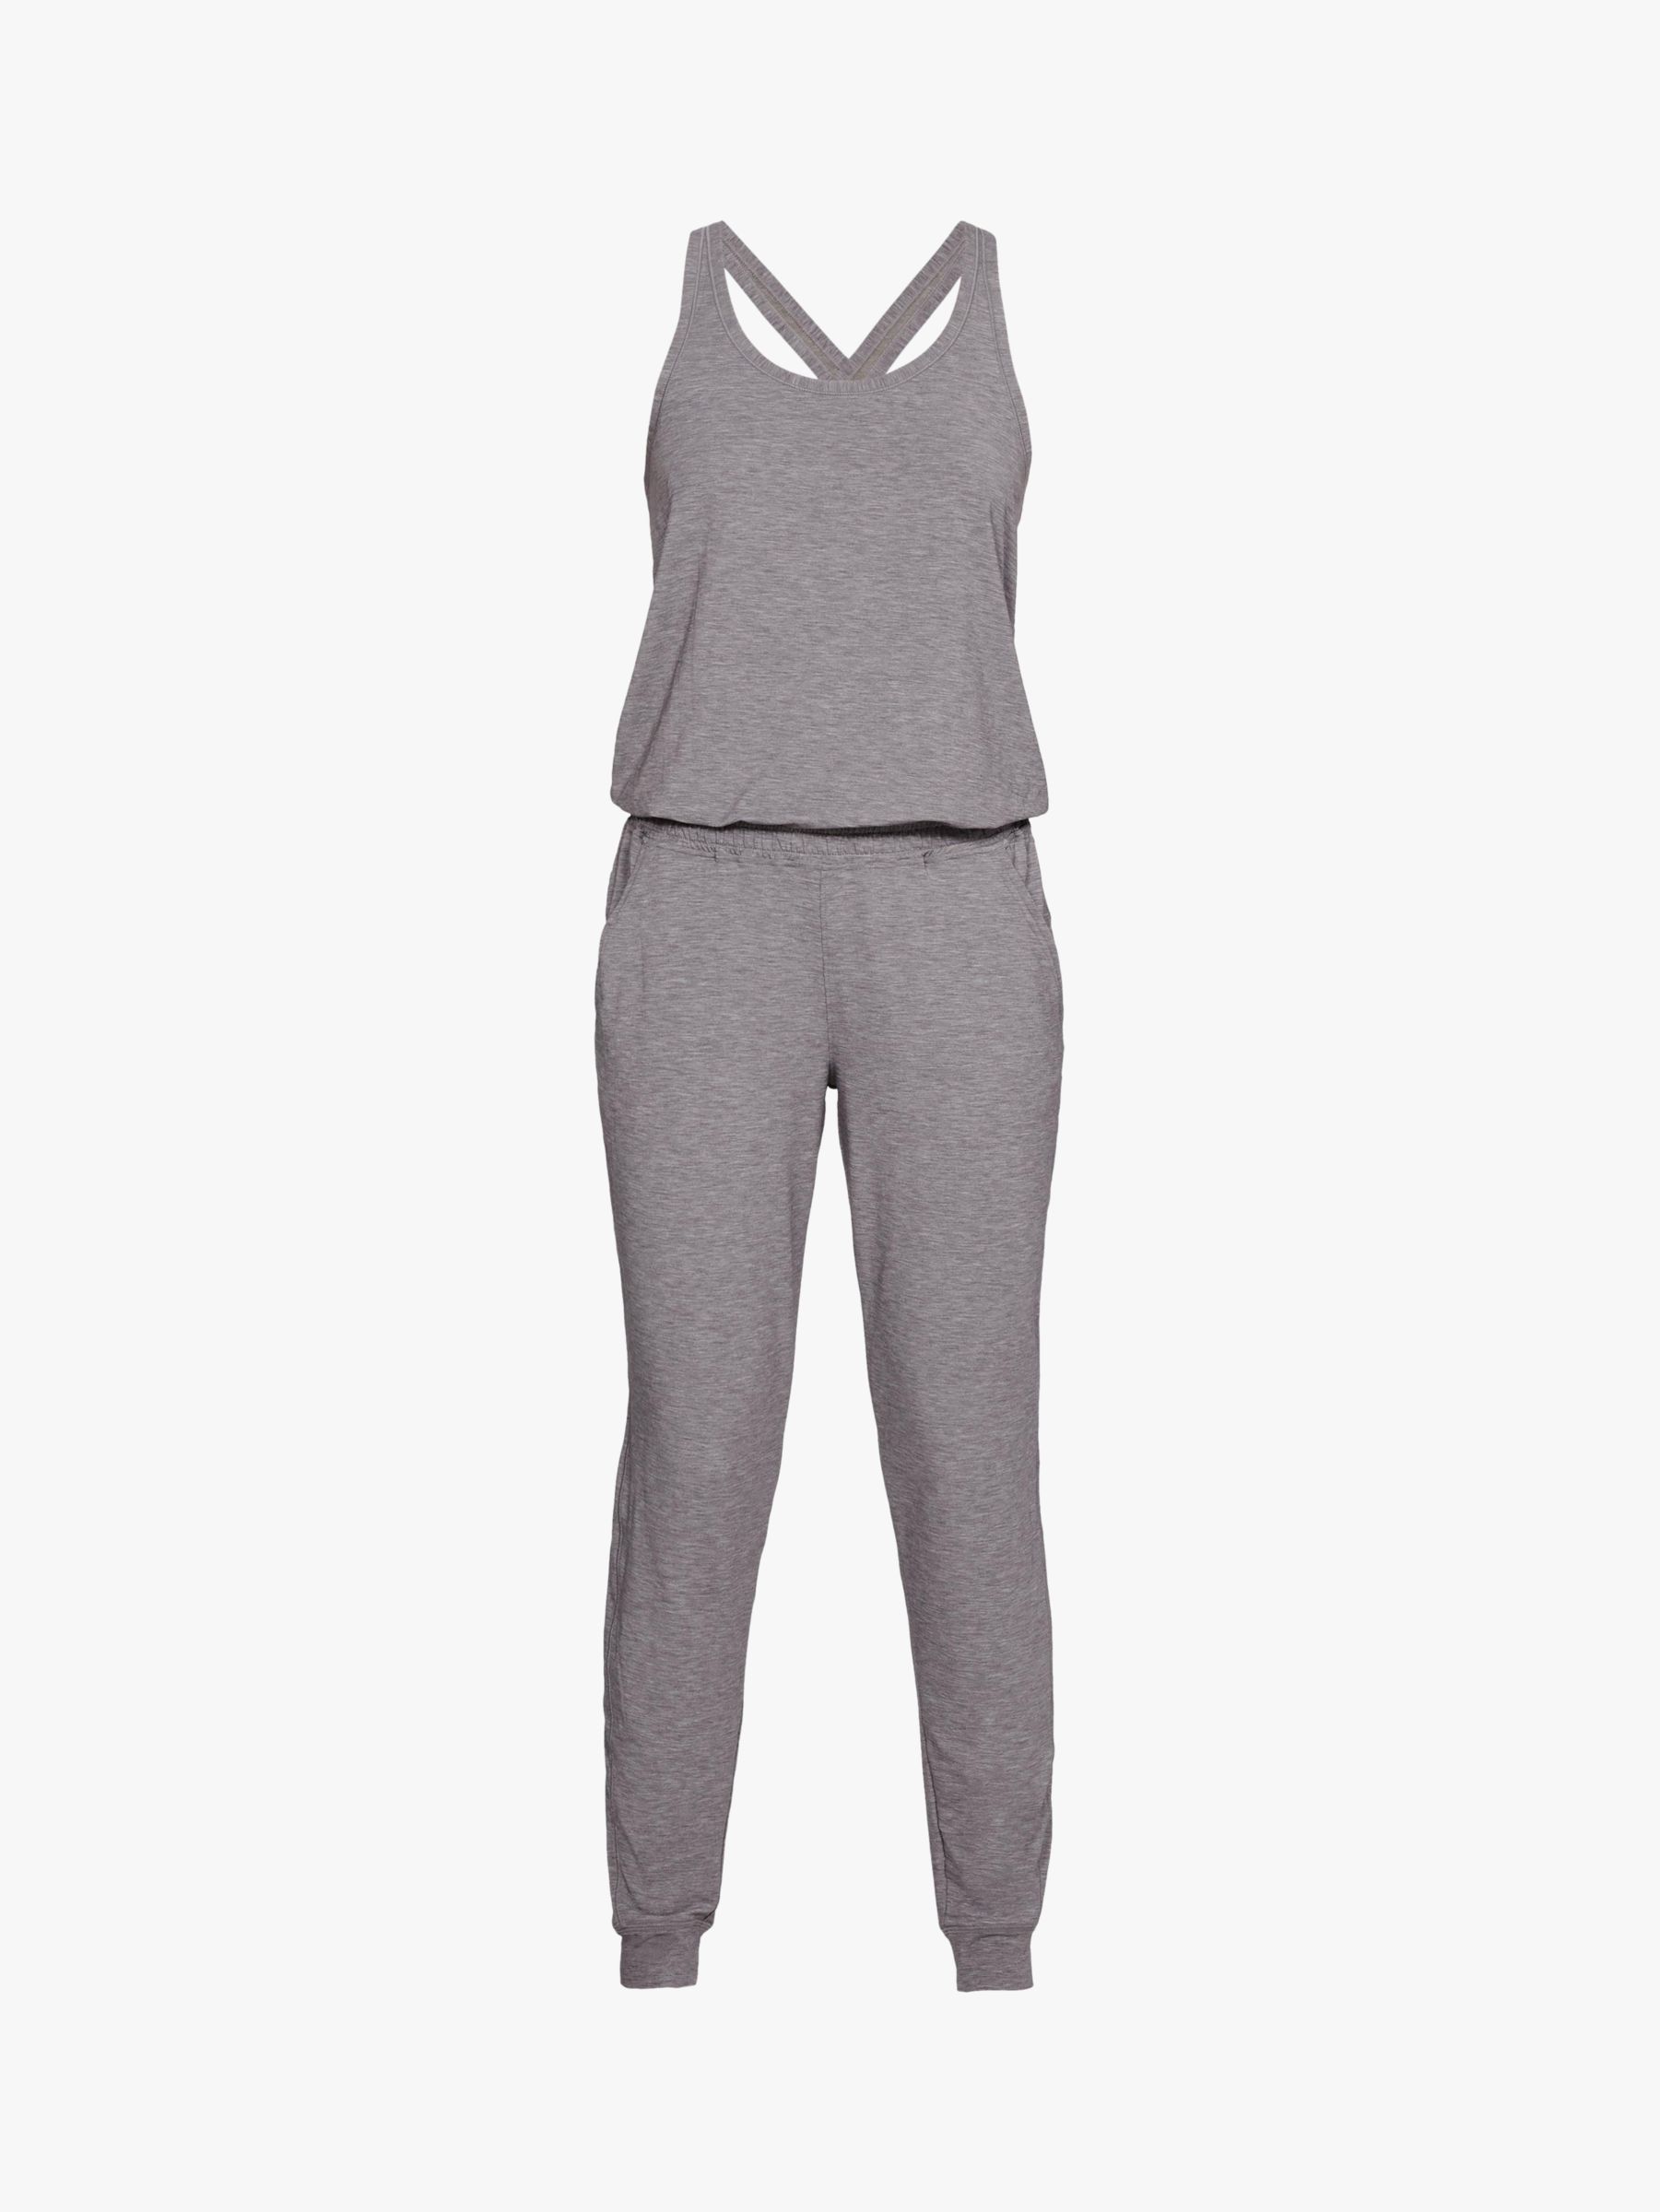 Under Armour Athlete Recovery Sleep Romper Jumpsuit, Grey